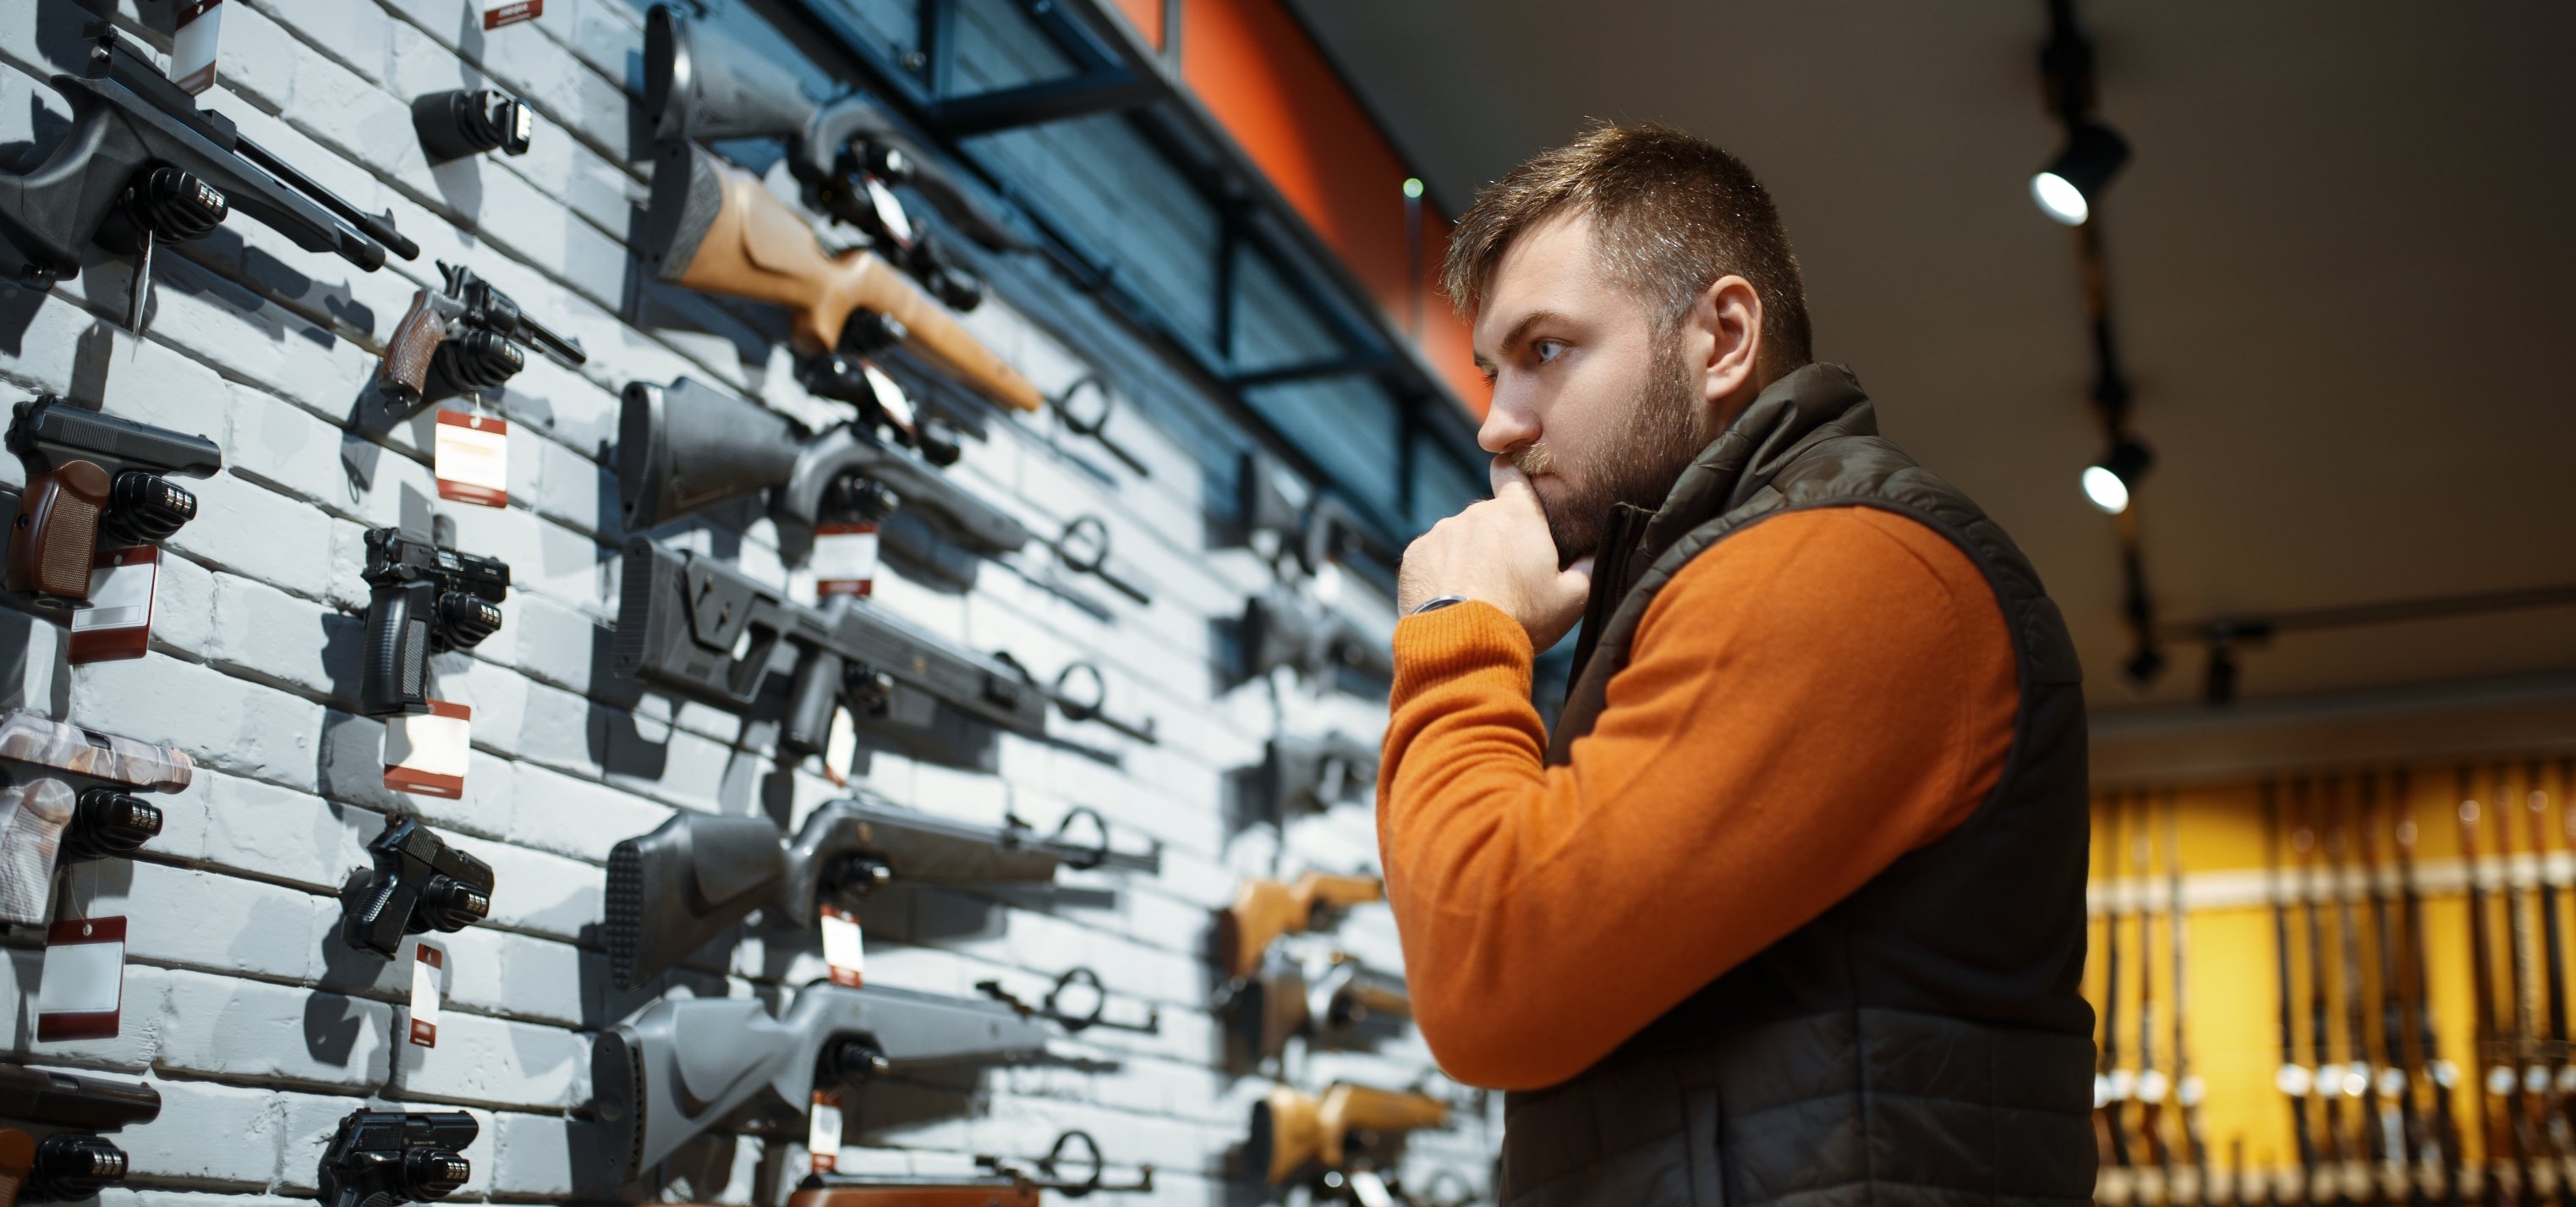 Questions to Ask BEFORE You Buy a Firearm